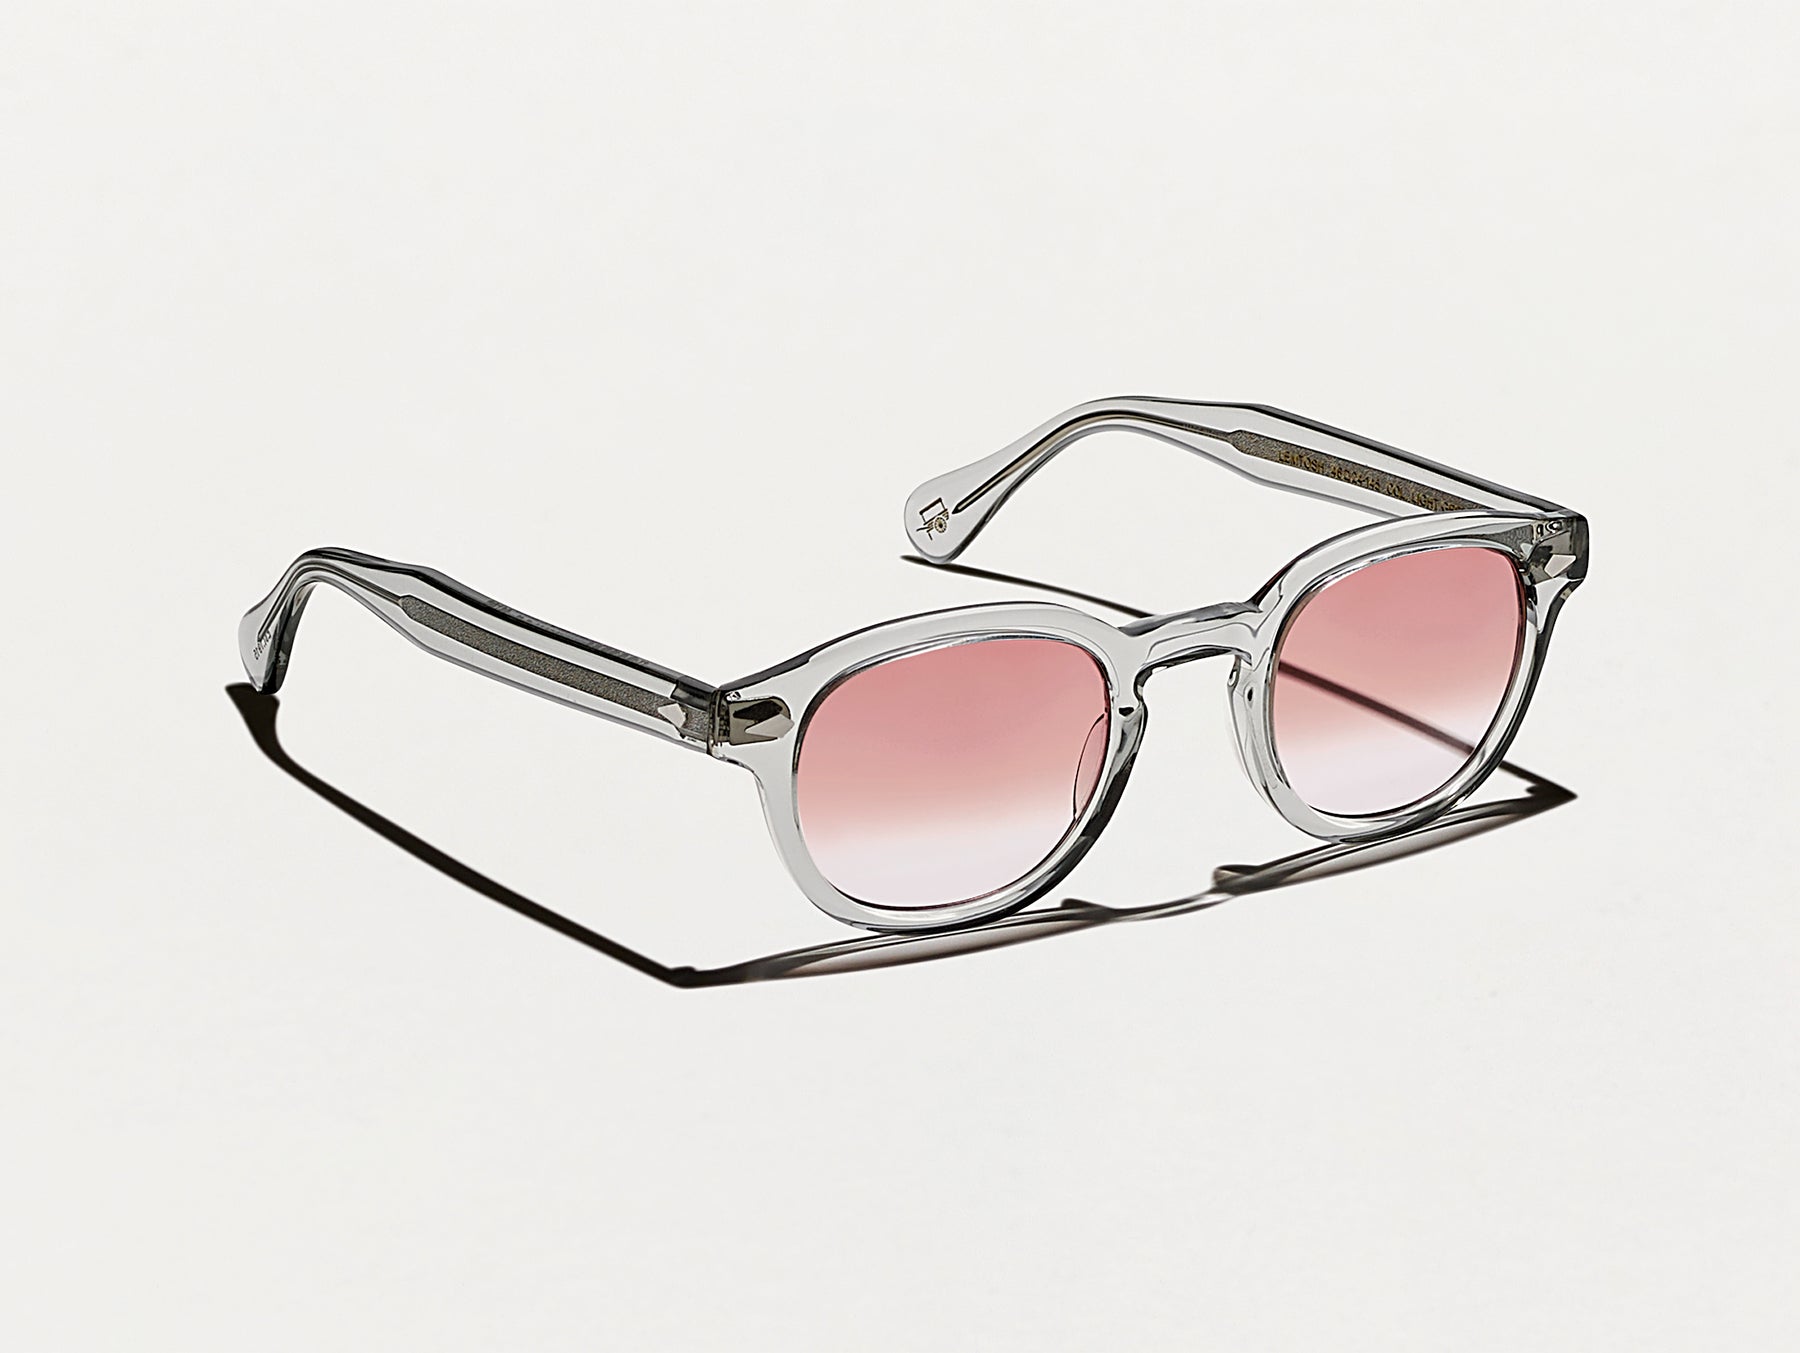 The LEMTOSH Light Grey with Root Beer Fade Tinted Lenses